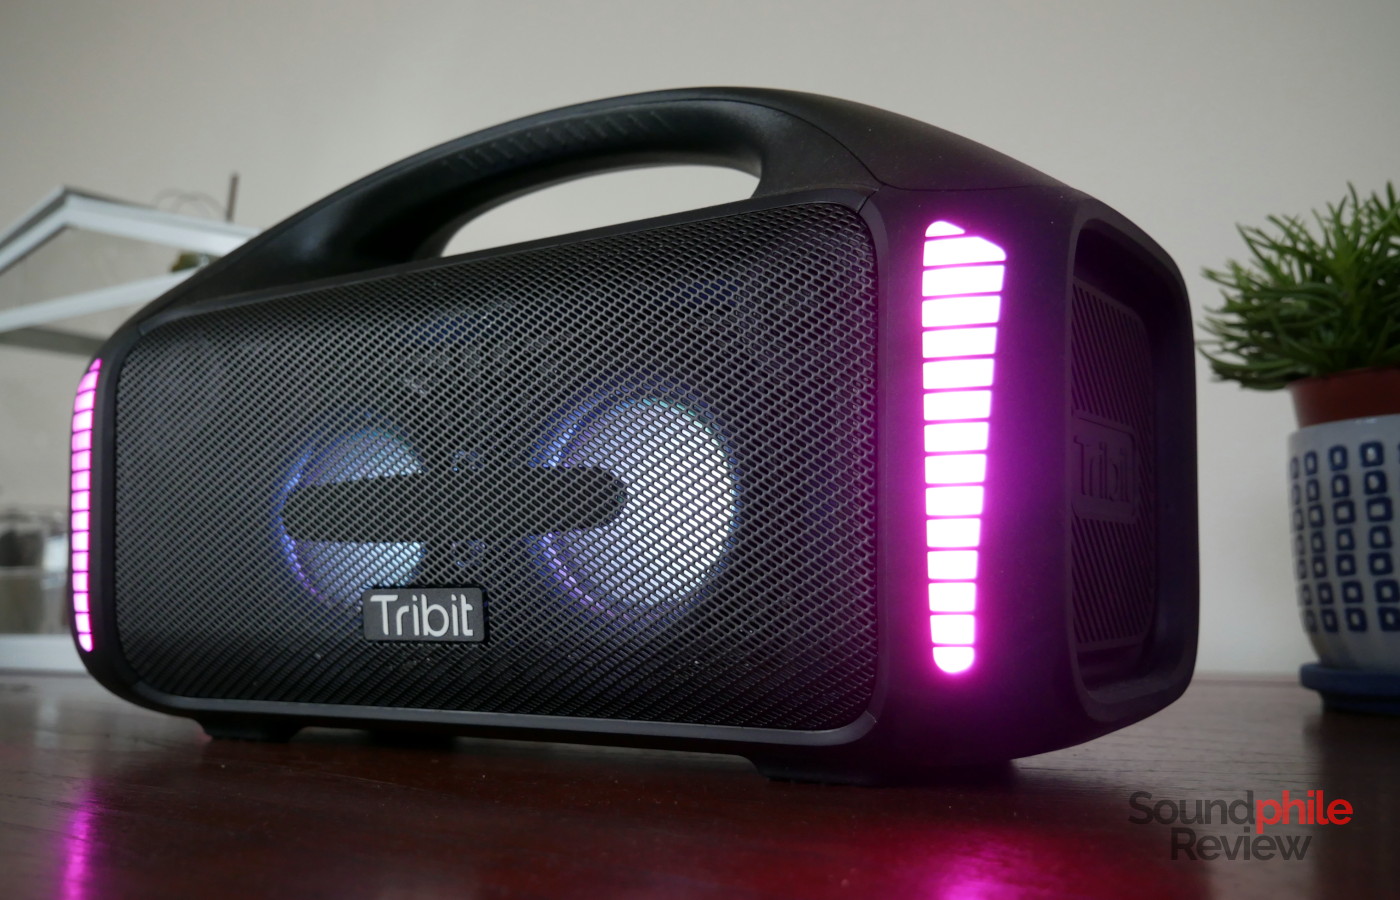 The Tribit Stormbox Blast has LED lights on its side and on its woofers